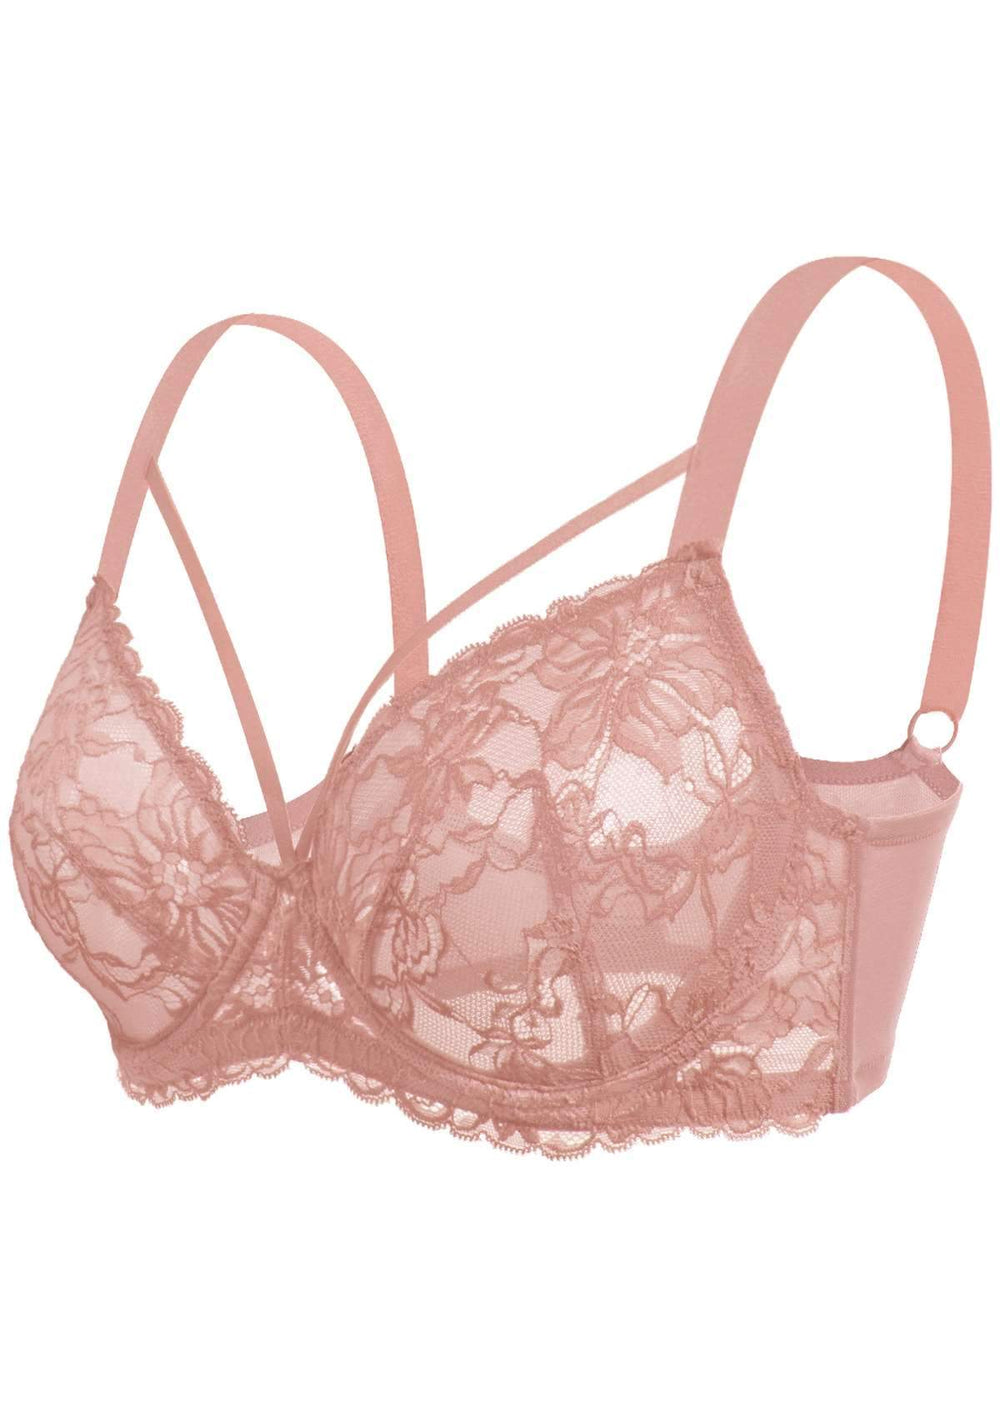 Exotic Pink Lacy Bra